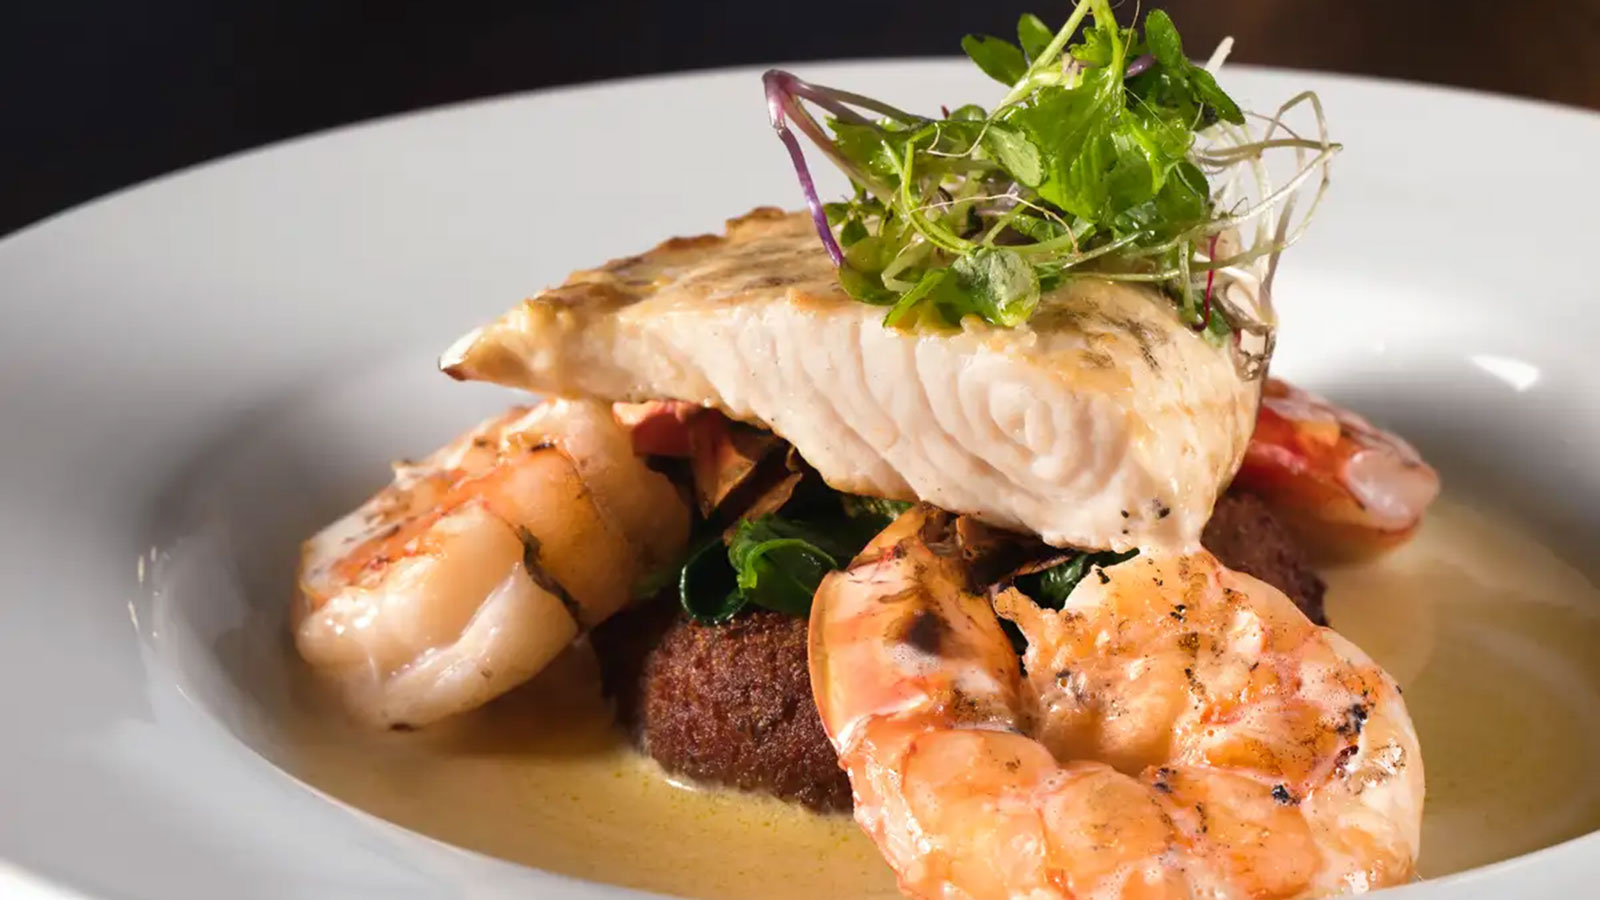 Taste the classic flavors of New England Seafood at Dodie's Dockside.